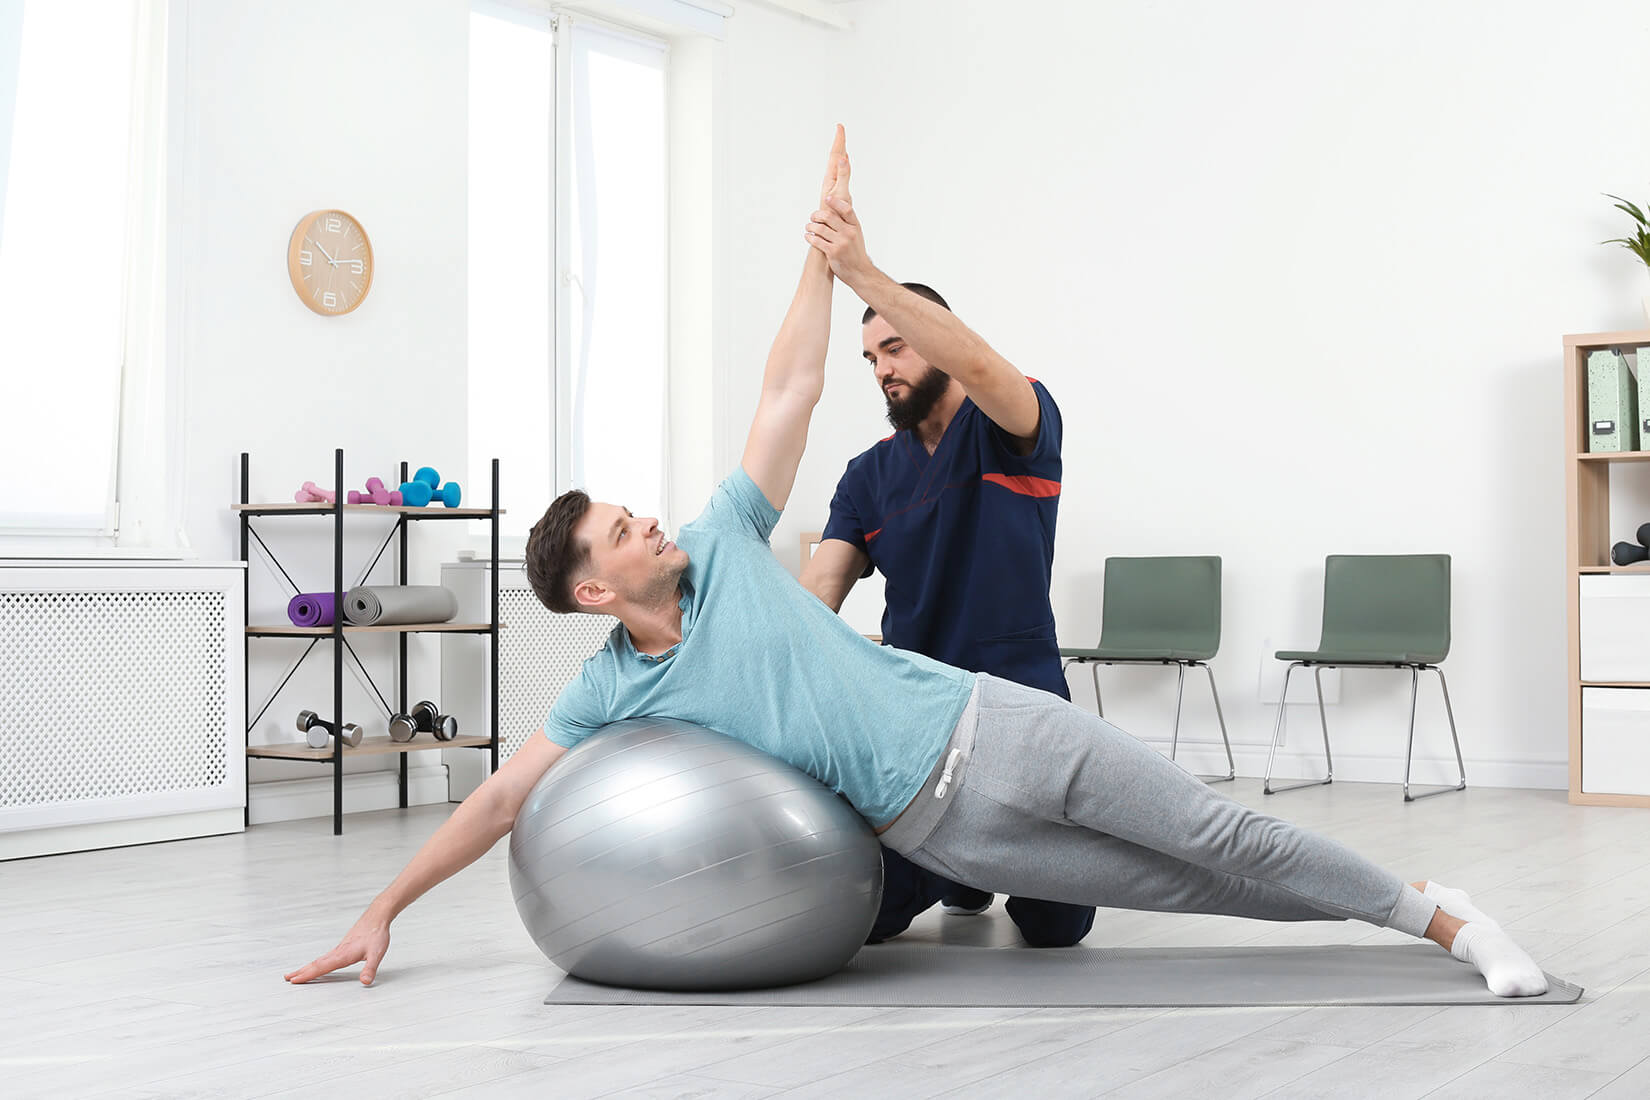 How does physical therapy help after surgery